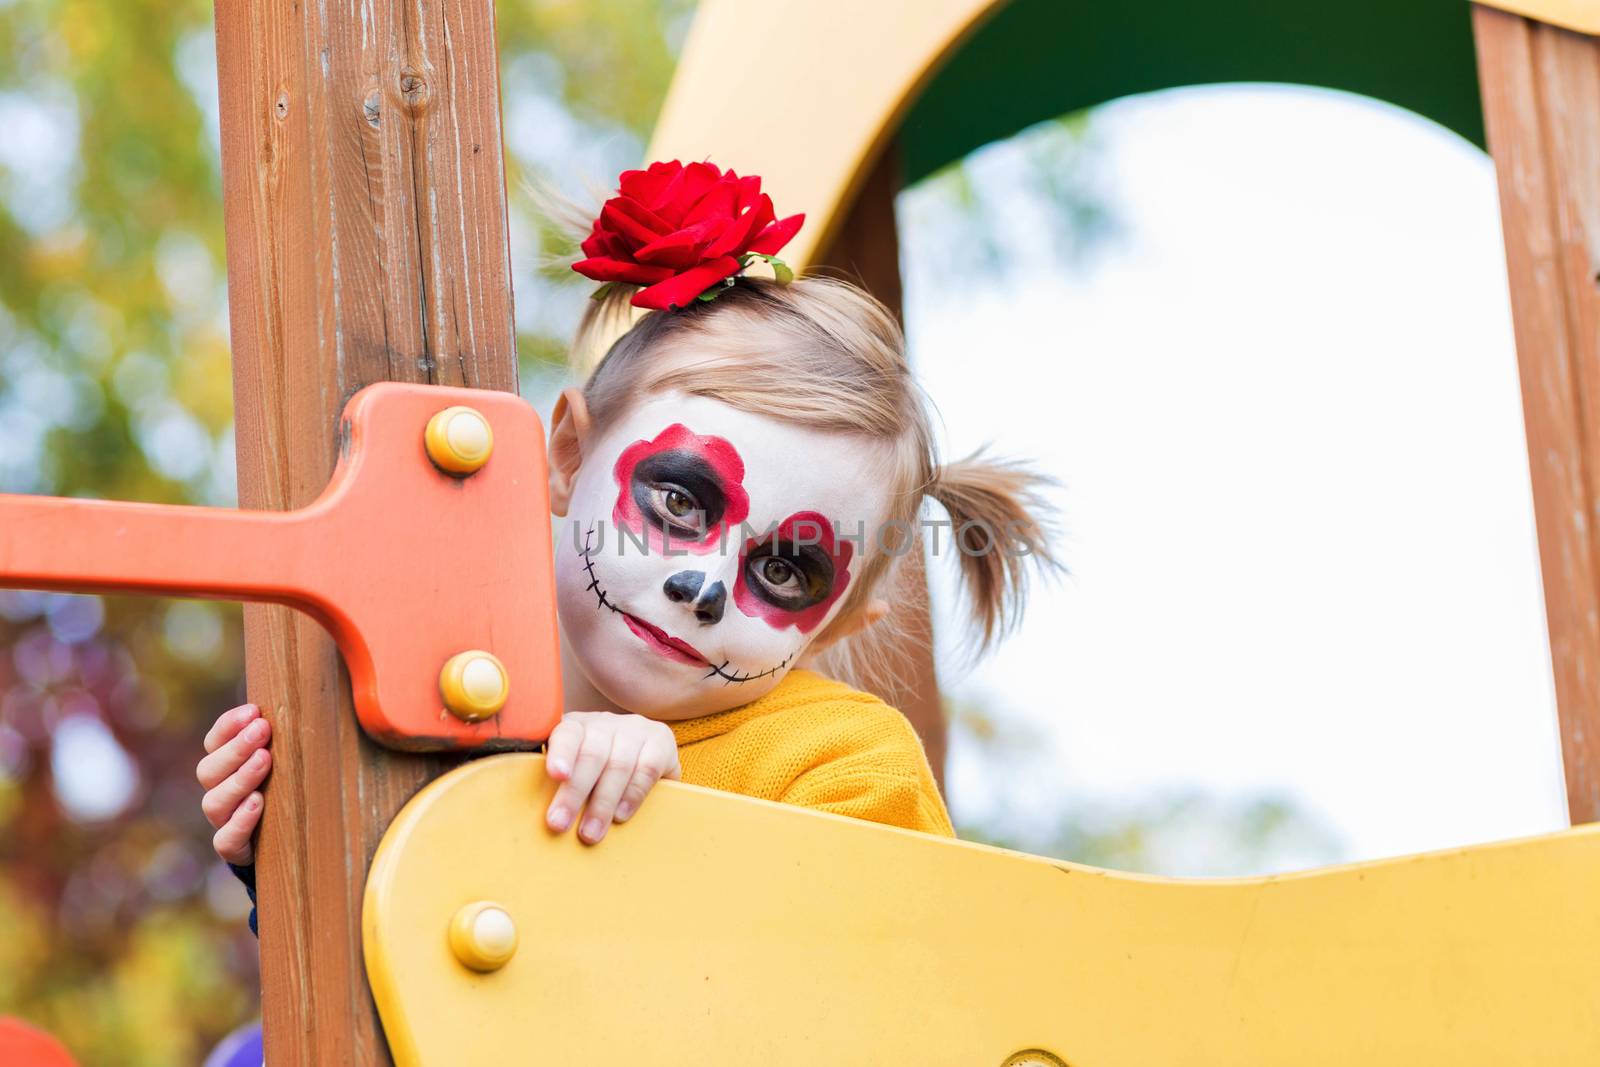 A little preschool girl with Painted Face, climbed the slide on the playground, celebrates Halloween or Mexican Day of the Dead.